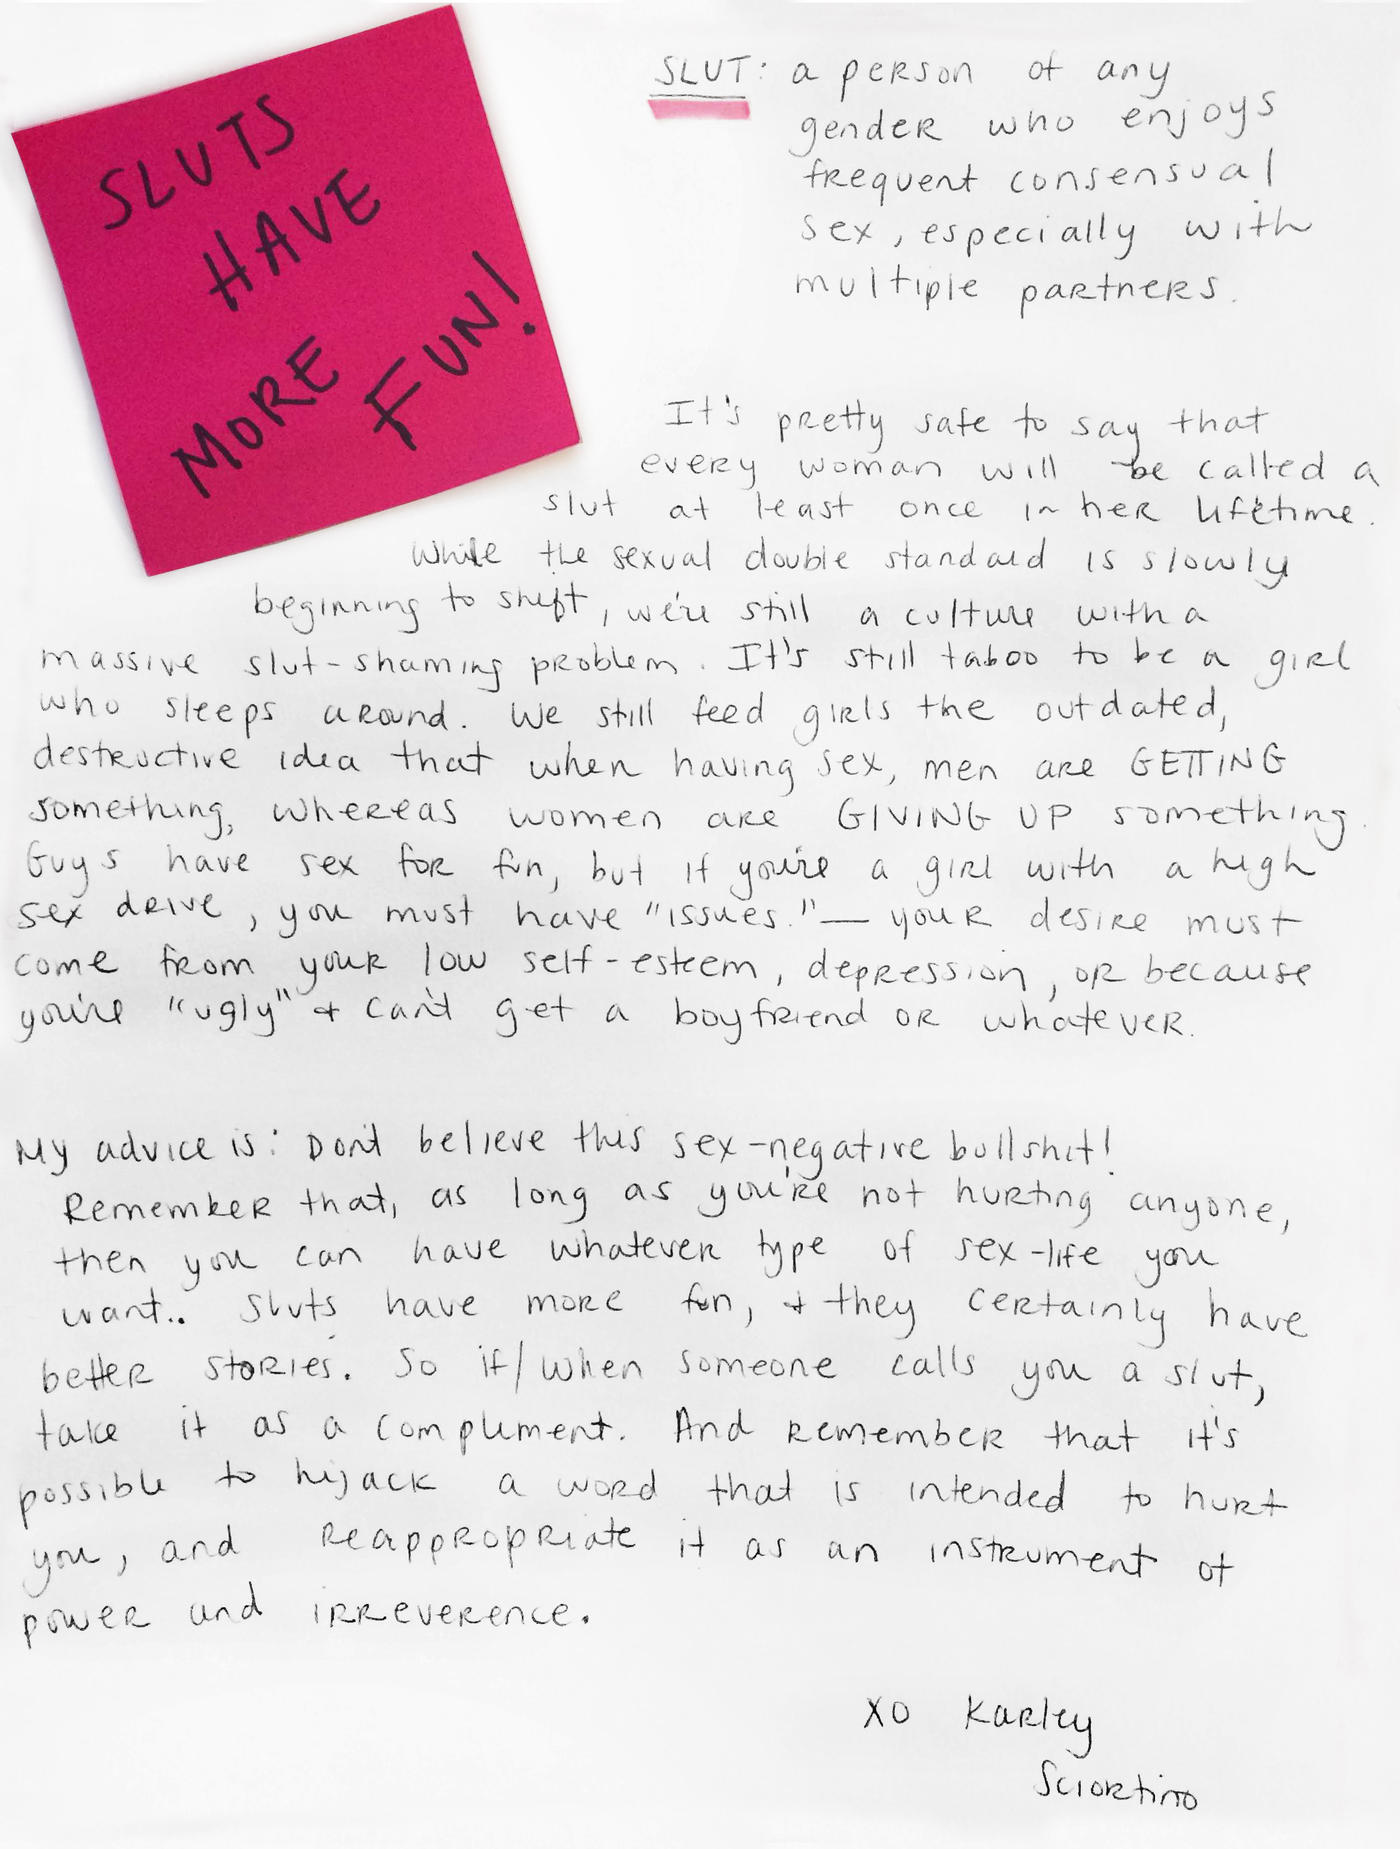 Karley Sciortino's Letter, The Provocateur